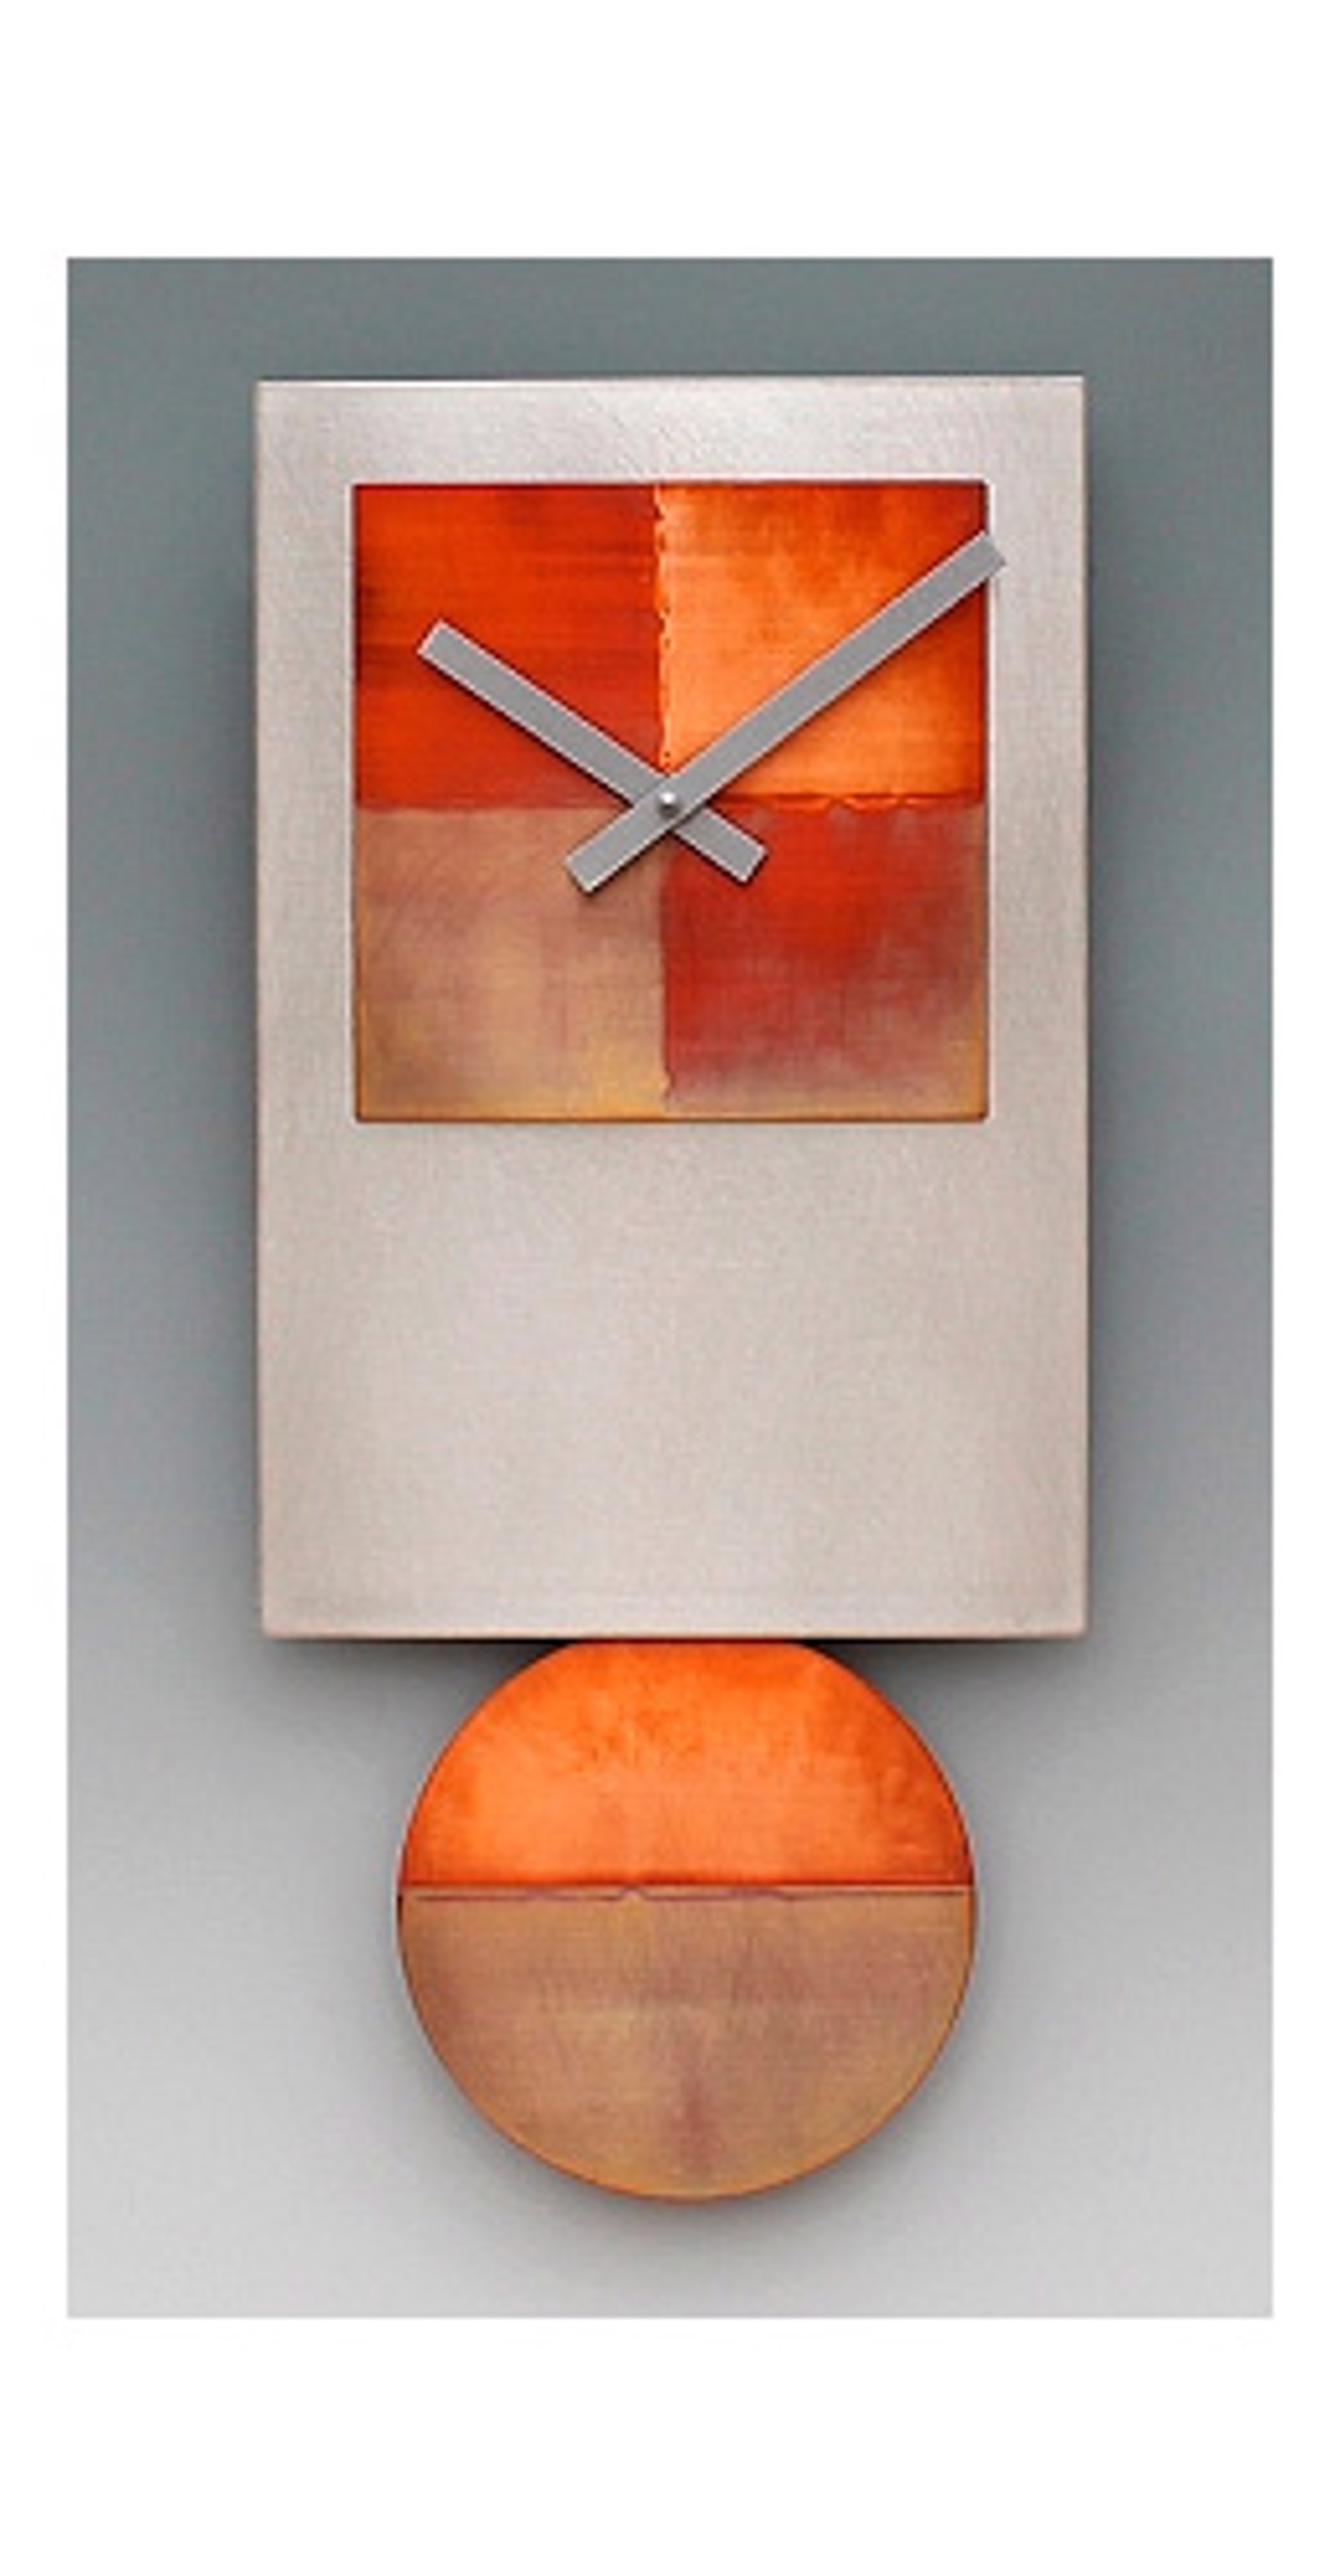 Steel Tie Pendulum Clock with Copper by Leonie Lacouette